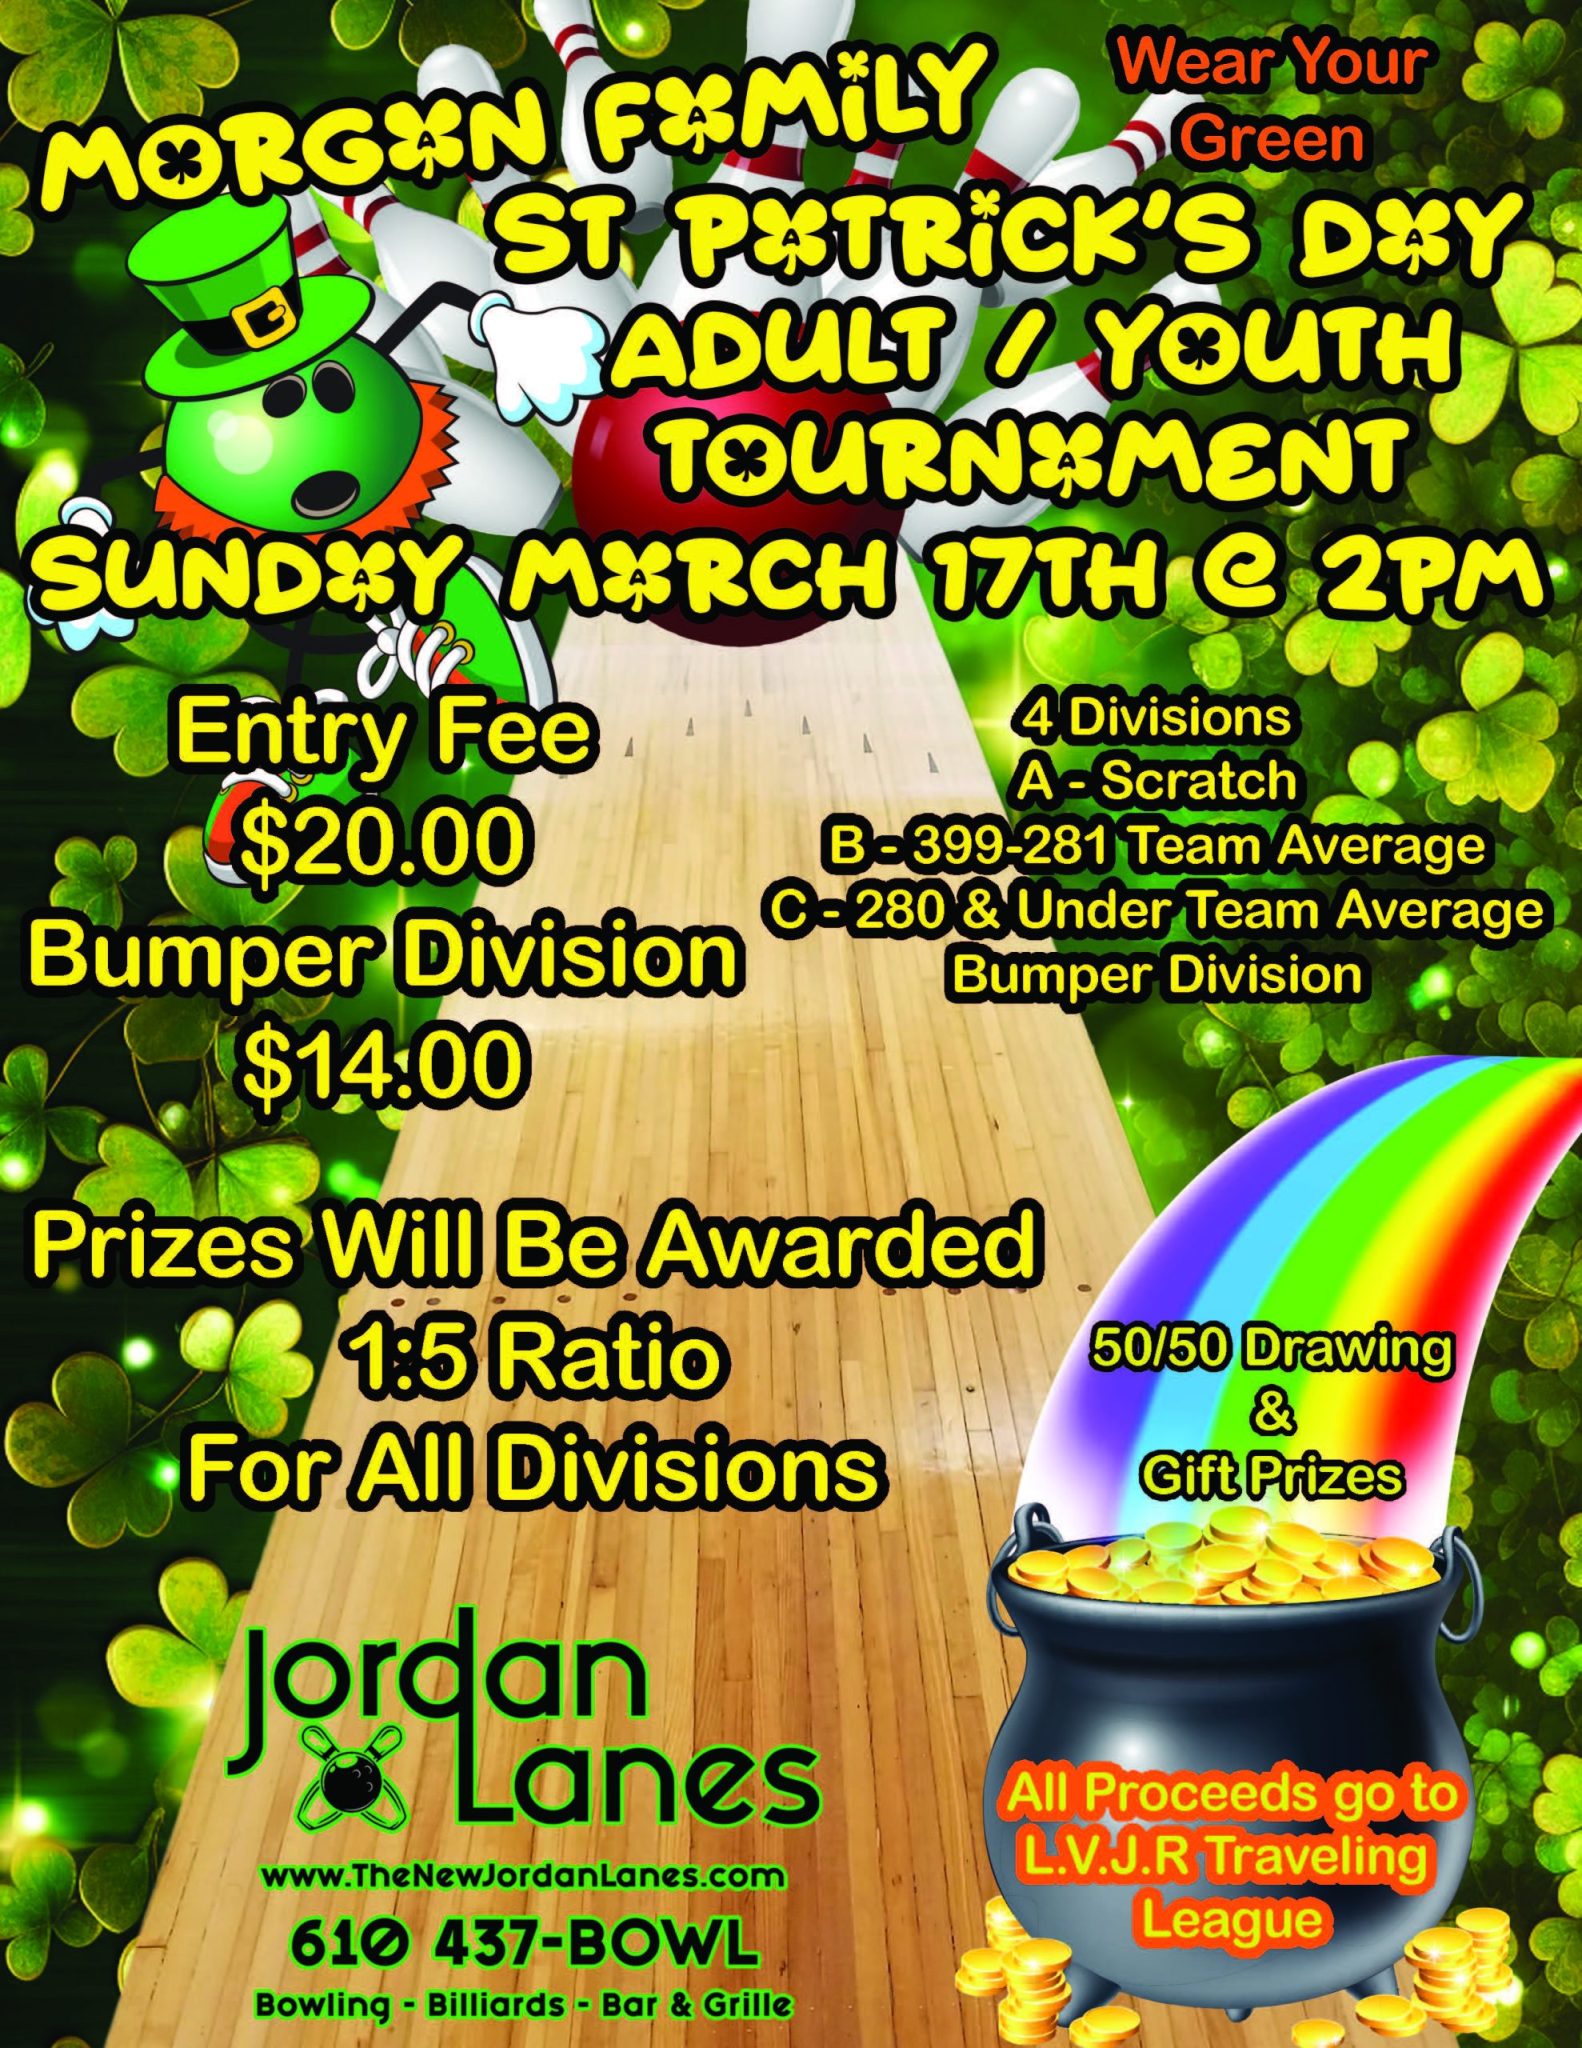 Morgan Family Adult / Youth Tournament 1